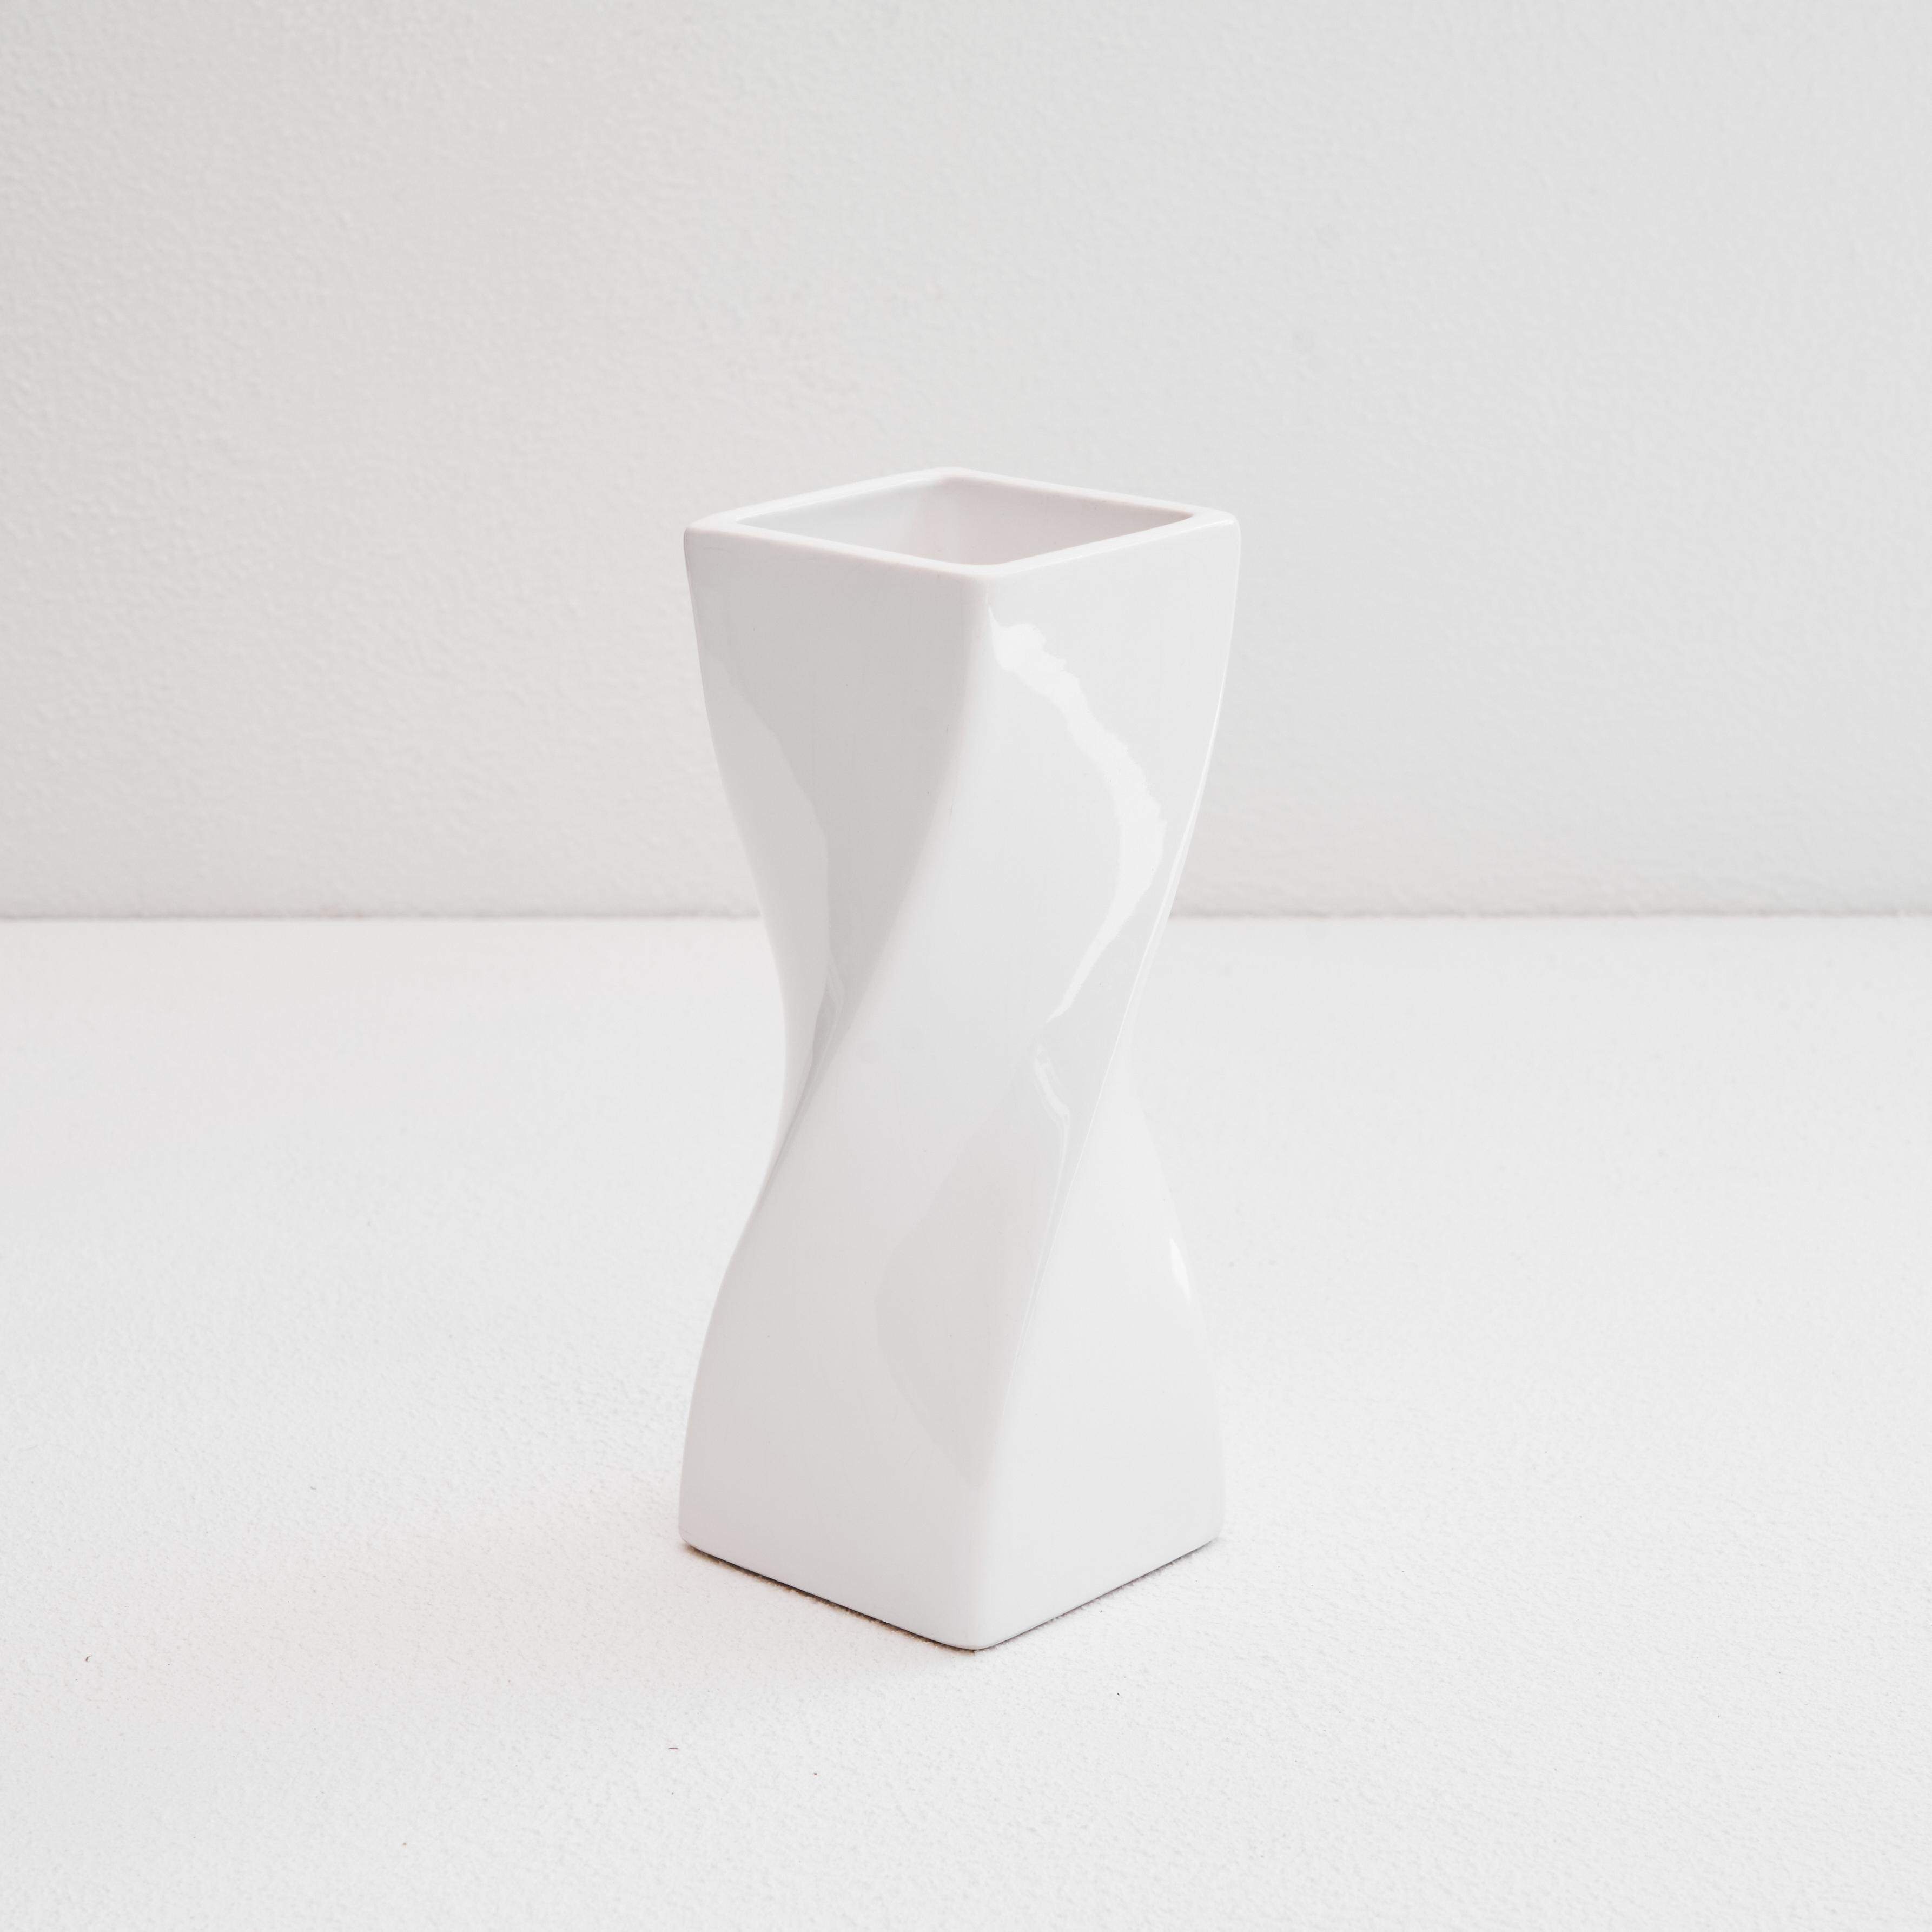 Twisted Vase in White Glazed Ceramic 1980s.

This is a wonderful white glazed ceramic vase with a postmodern shape. The twisted shape makes this vase is looking different from every point of view and never bores. It resembles works by Dutch